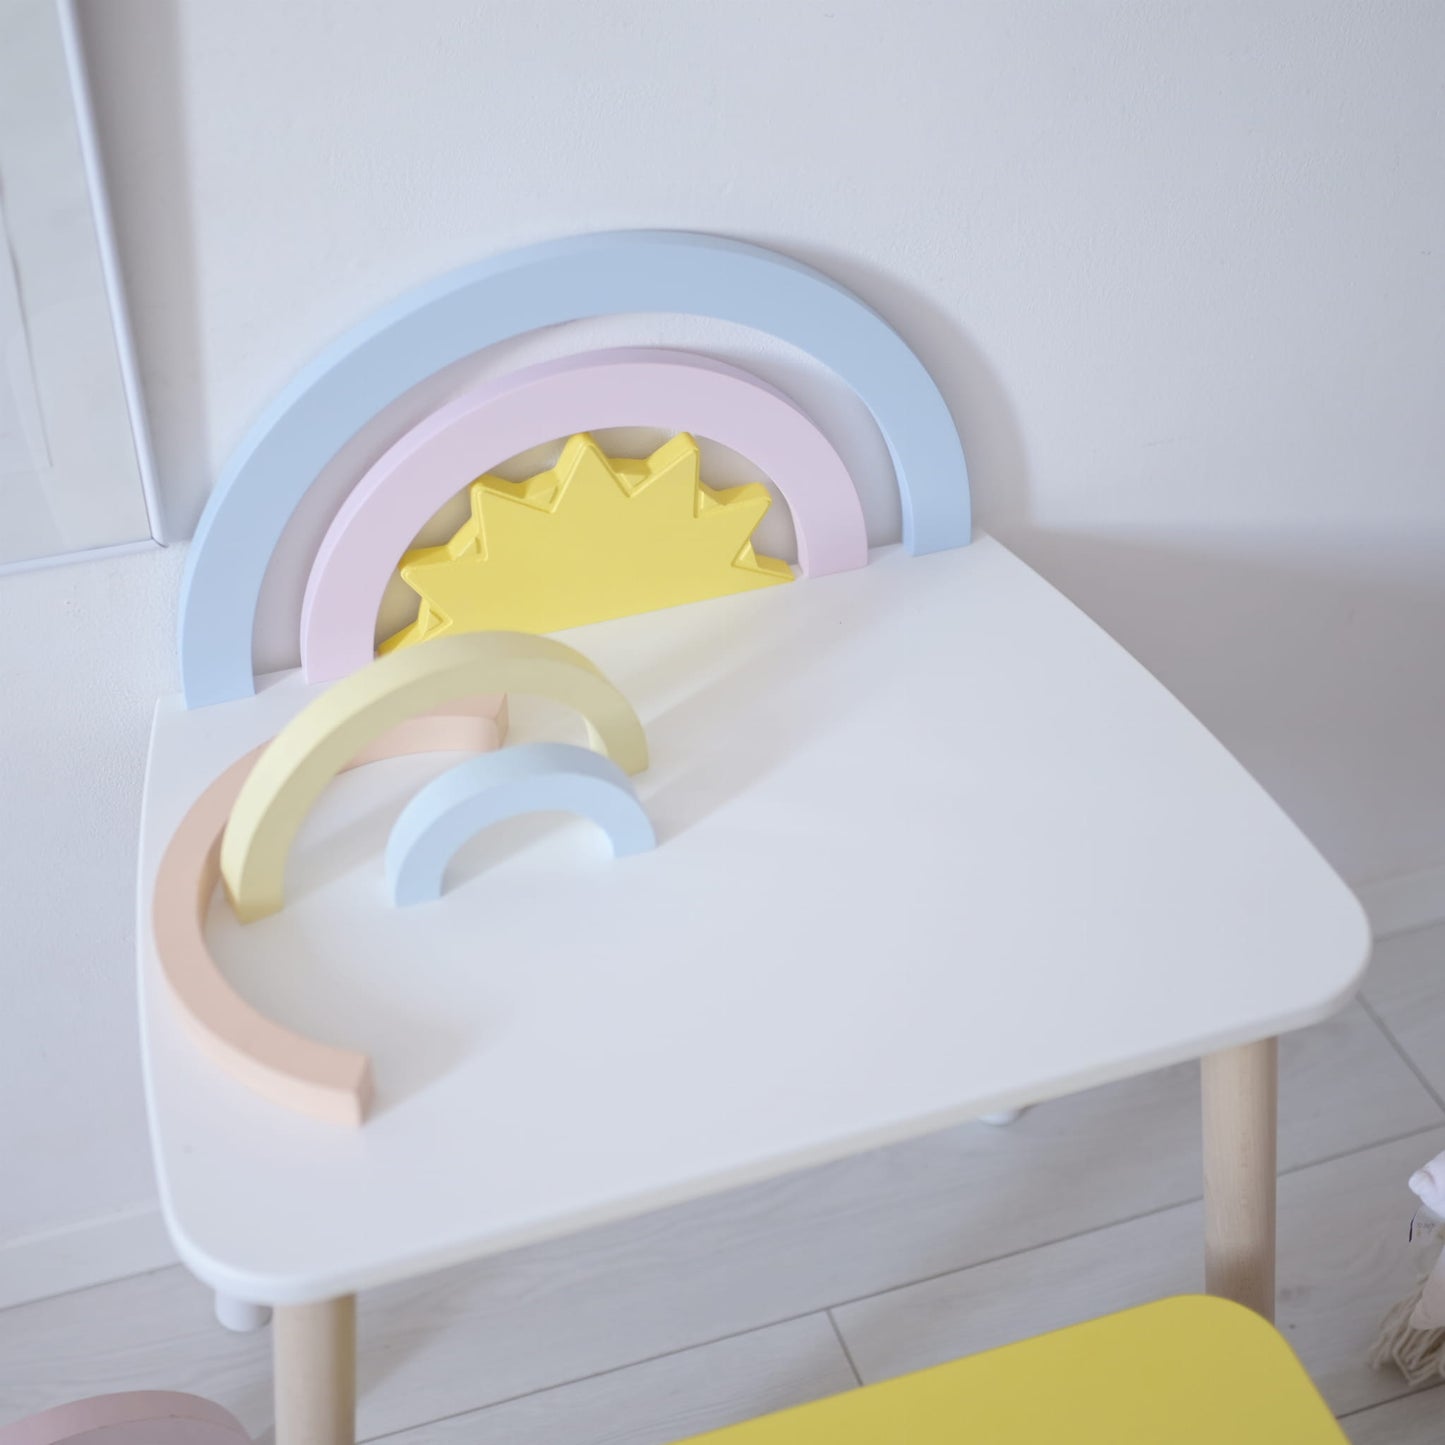 Toddler play table, Kid's activity table,Table and Chair Set, Children Room, Girls furniture,Dressing Table, vanity table, sensory table, kids craft table, gift for grandchild, wooden play table, nursery, nursery furnitures, pink furnitures, bear chair, flower mirror, pink table, 